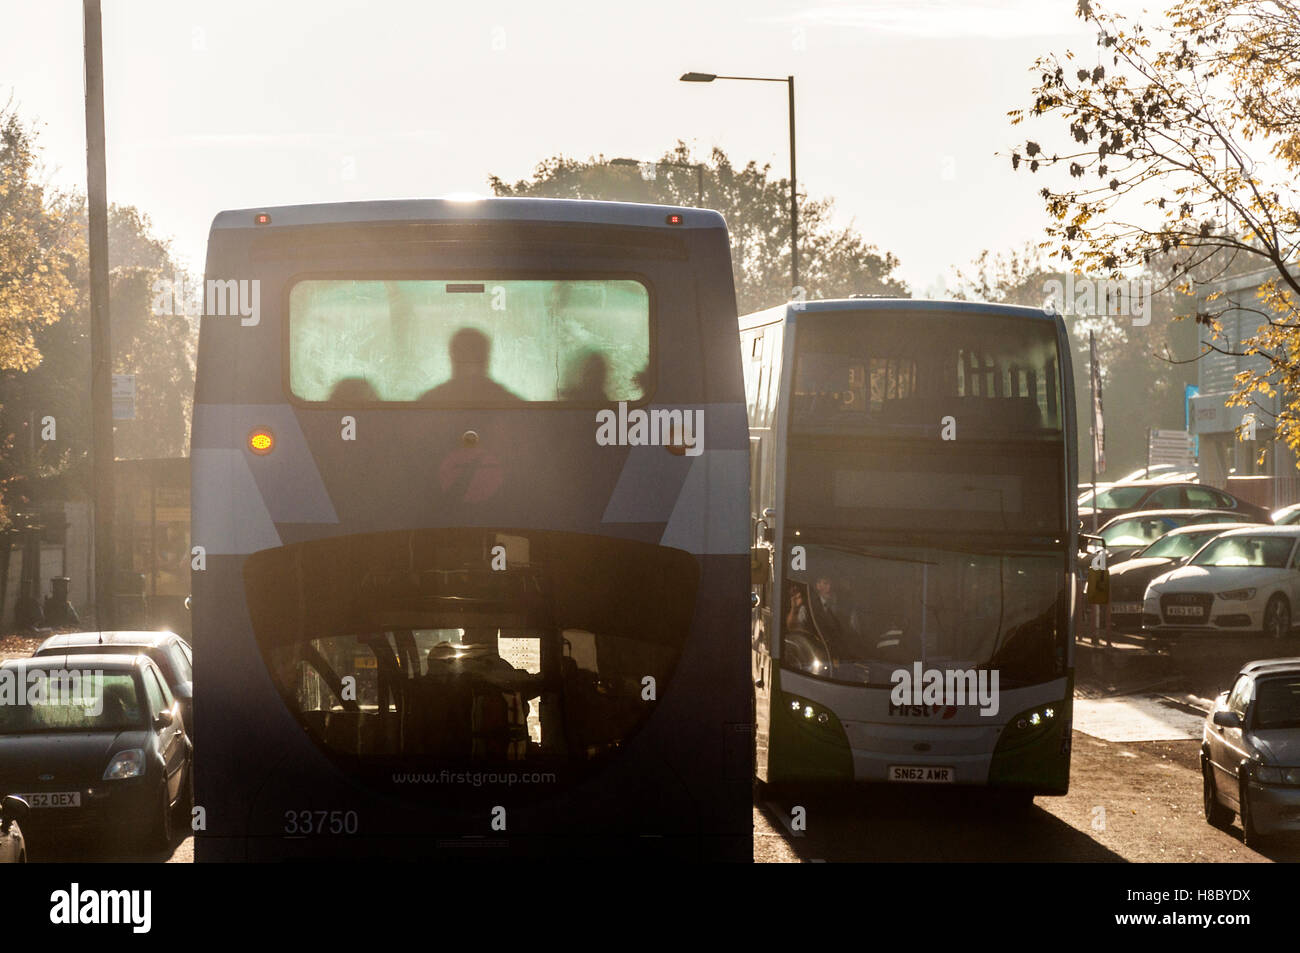 Early morning Firstgroup buses in Bath, Somerset, England, Uk Stock Photo